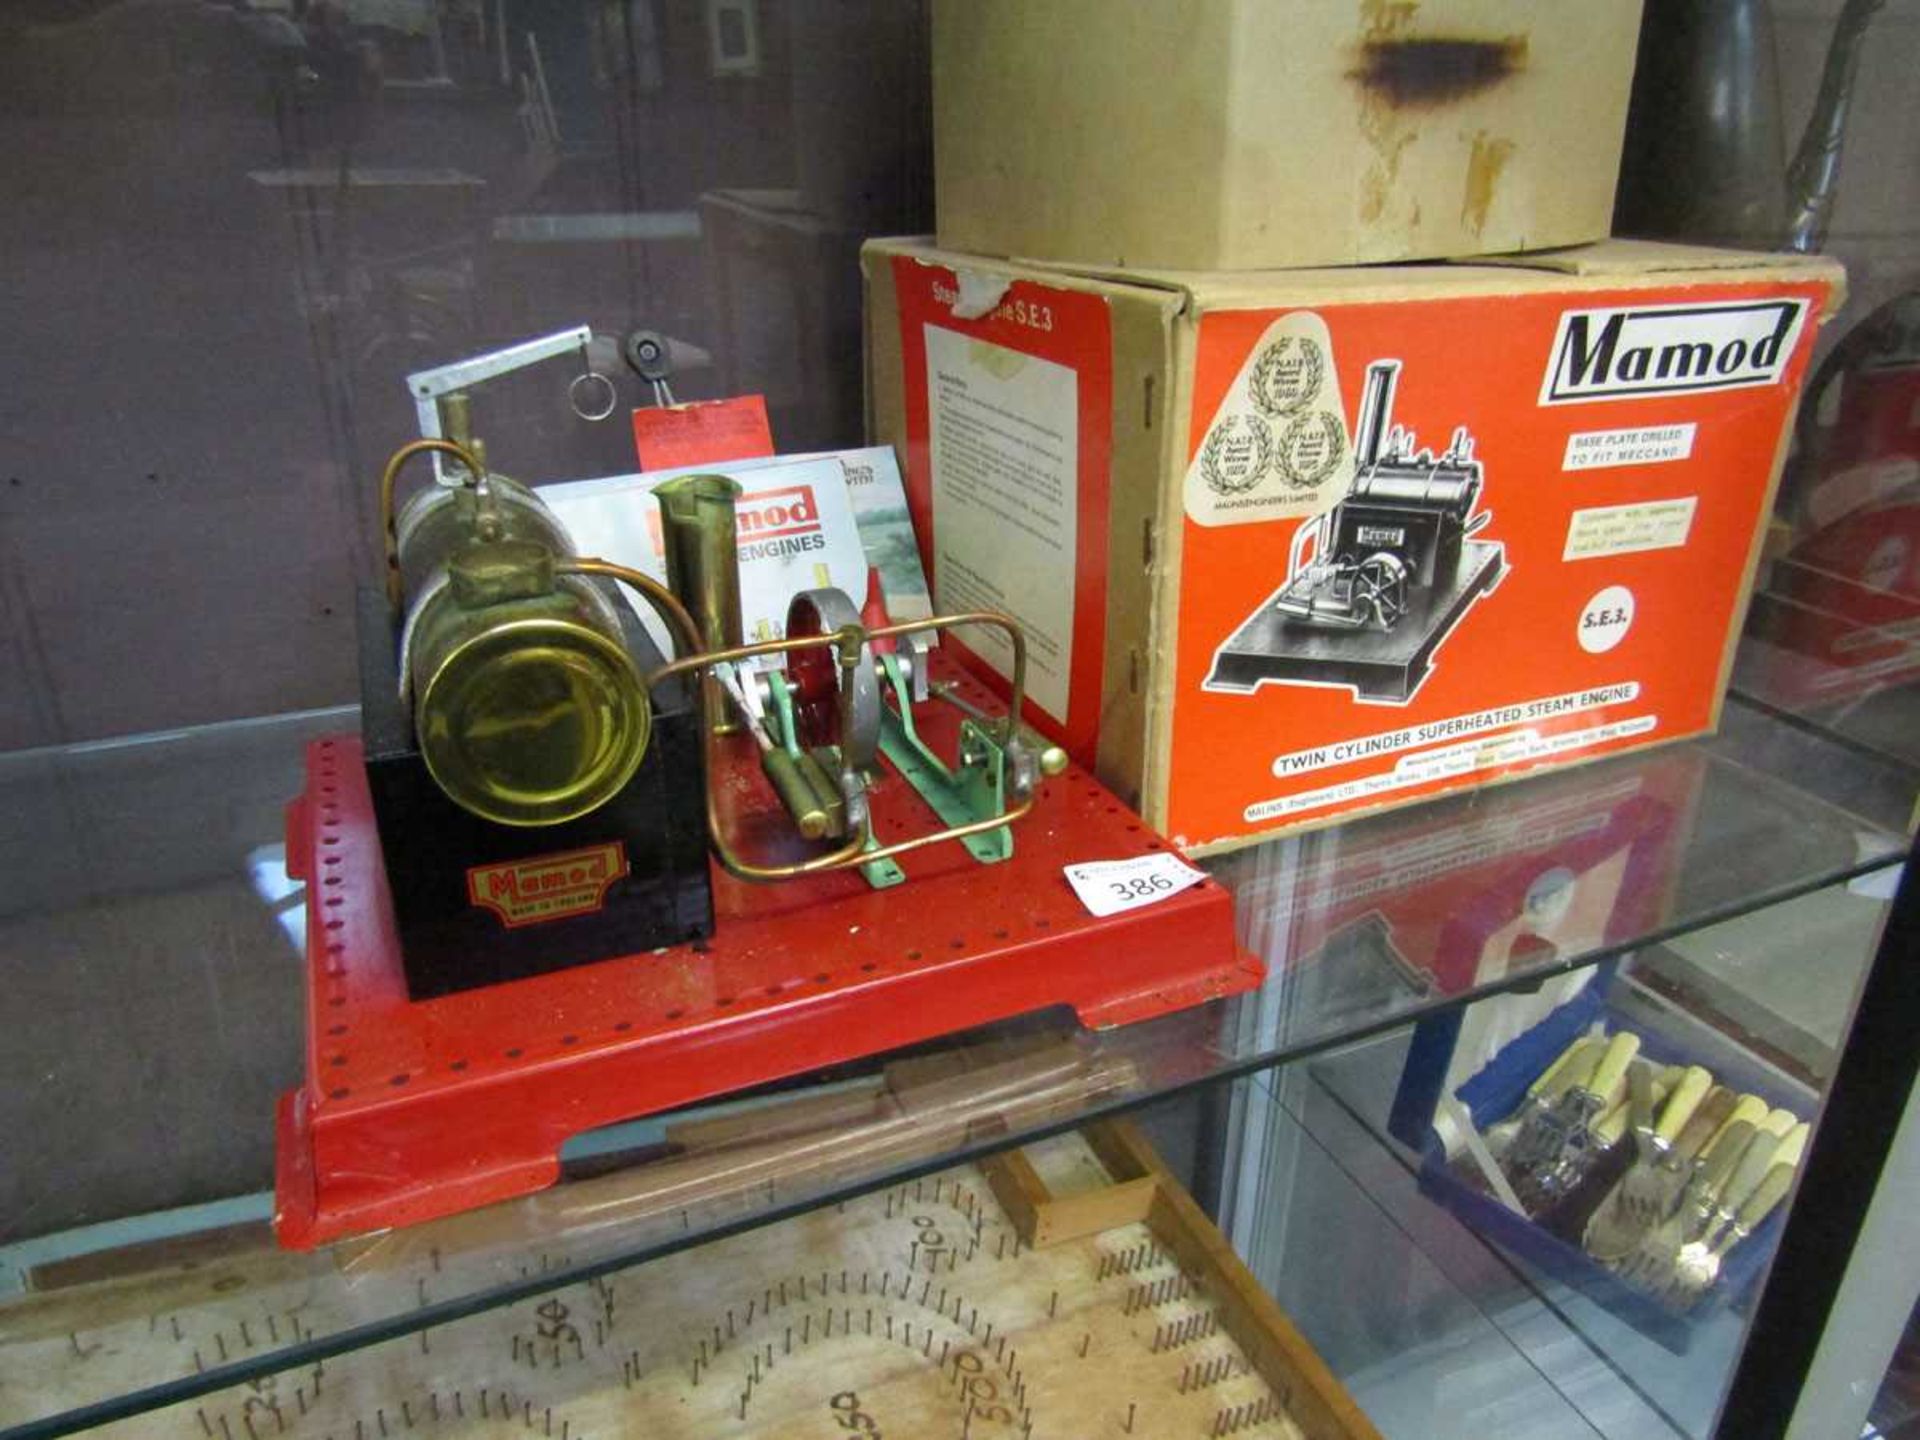 A boxed Mamod 'Twin Cylinder Superheated Steam Engine' S.E.3.